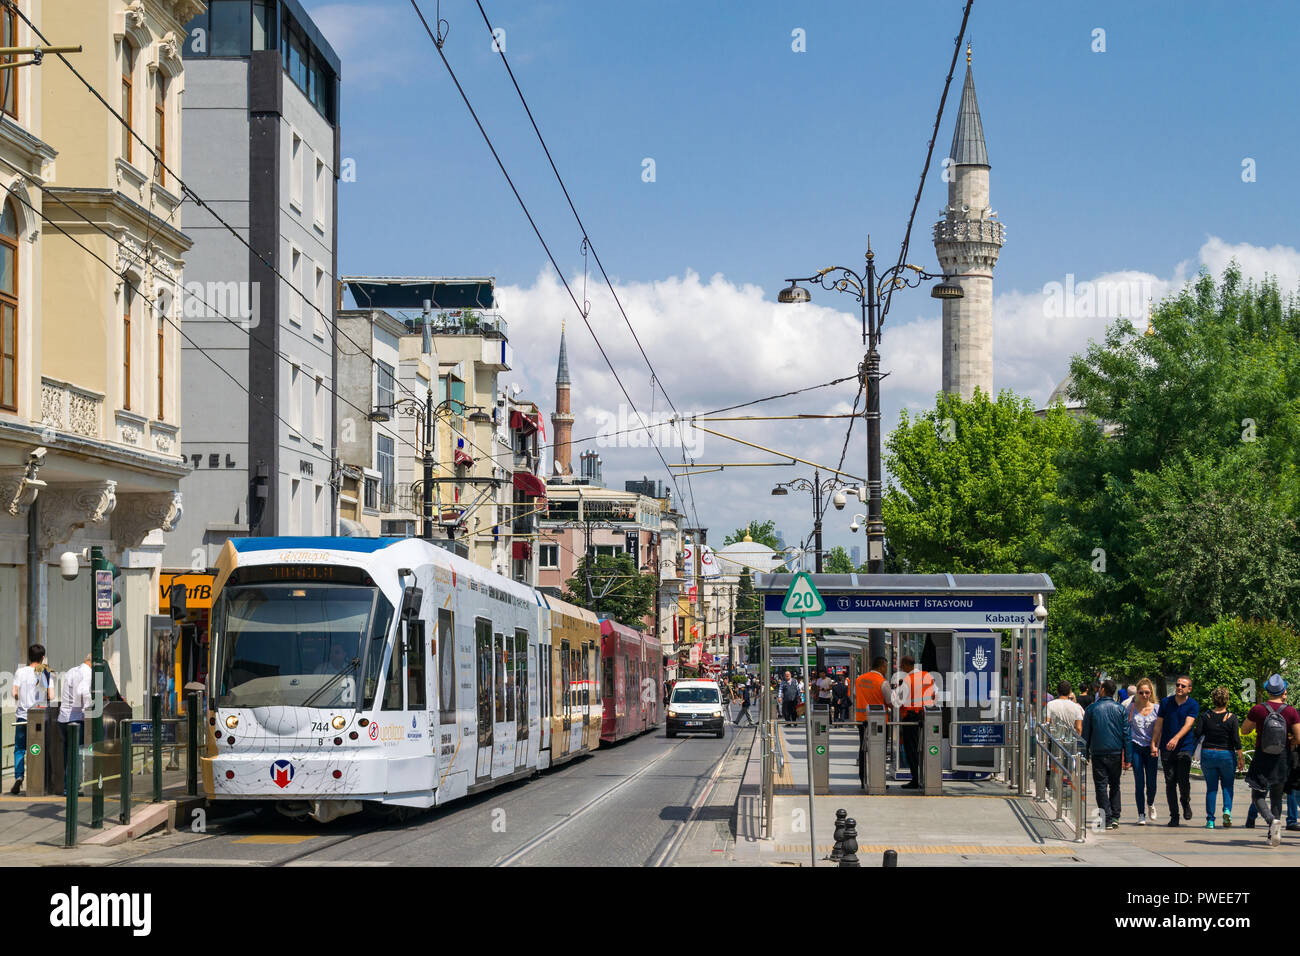 Sultanahmet T1 tram station with tram at platform as people walk past, Istanbul, Turkey Stock Photo